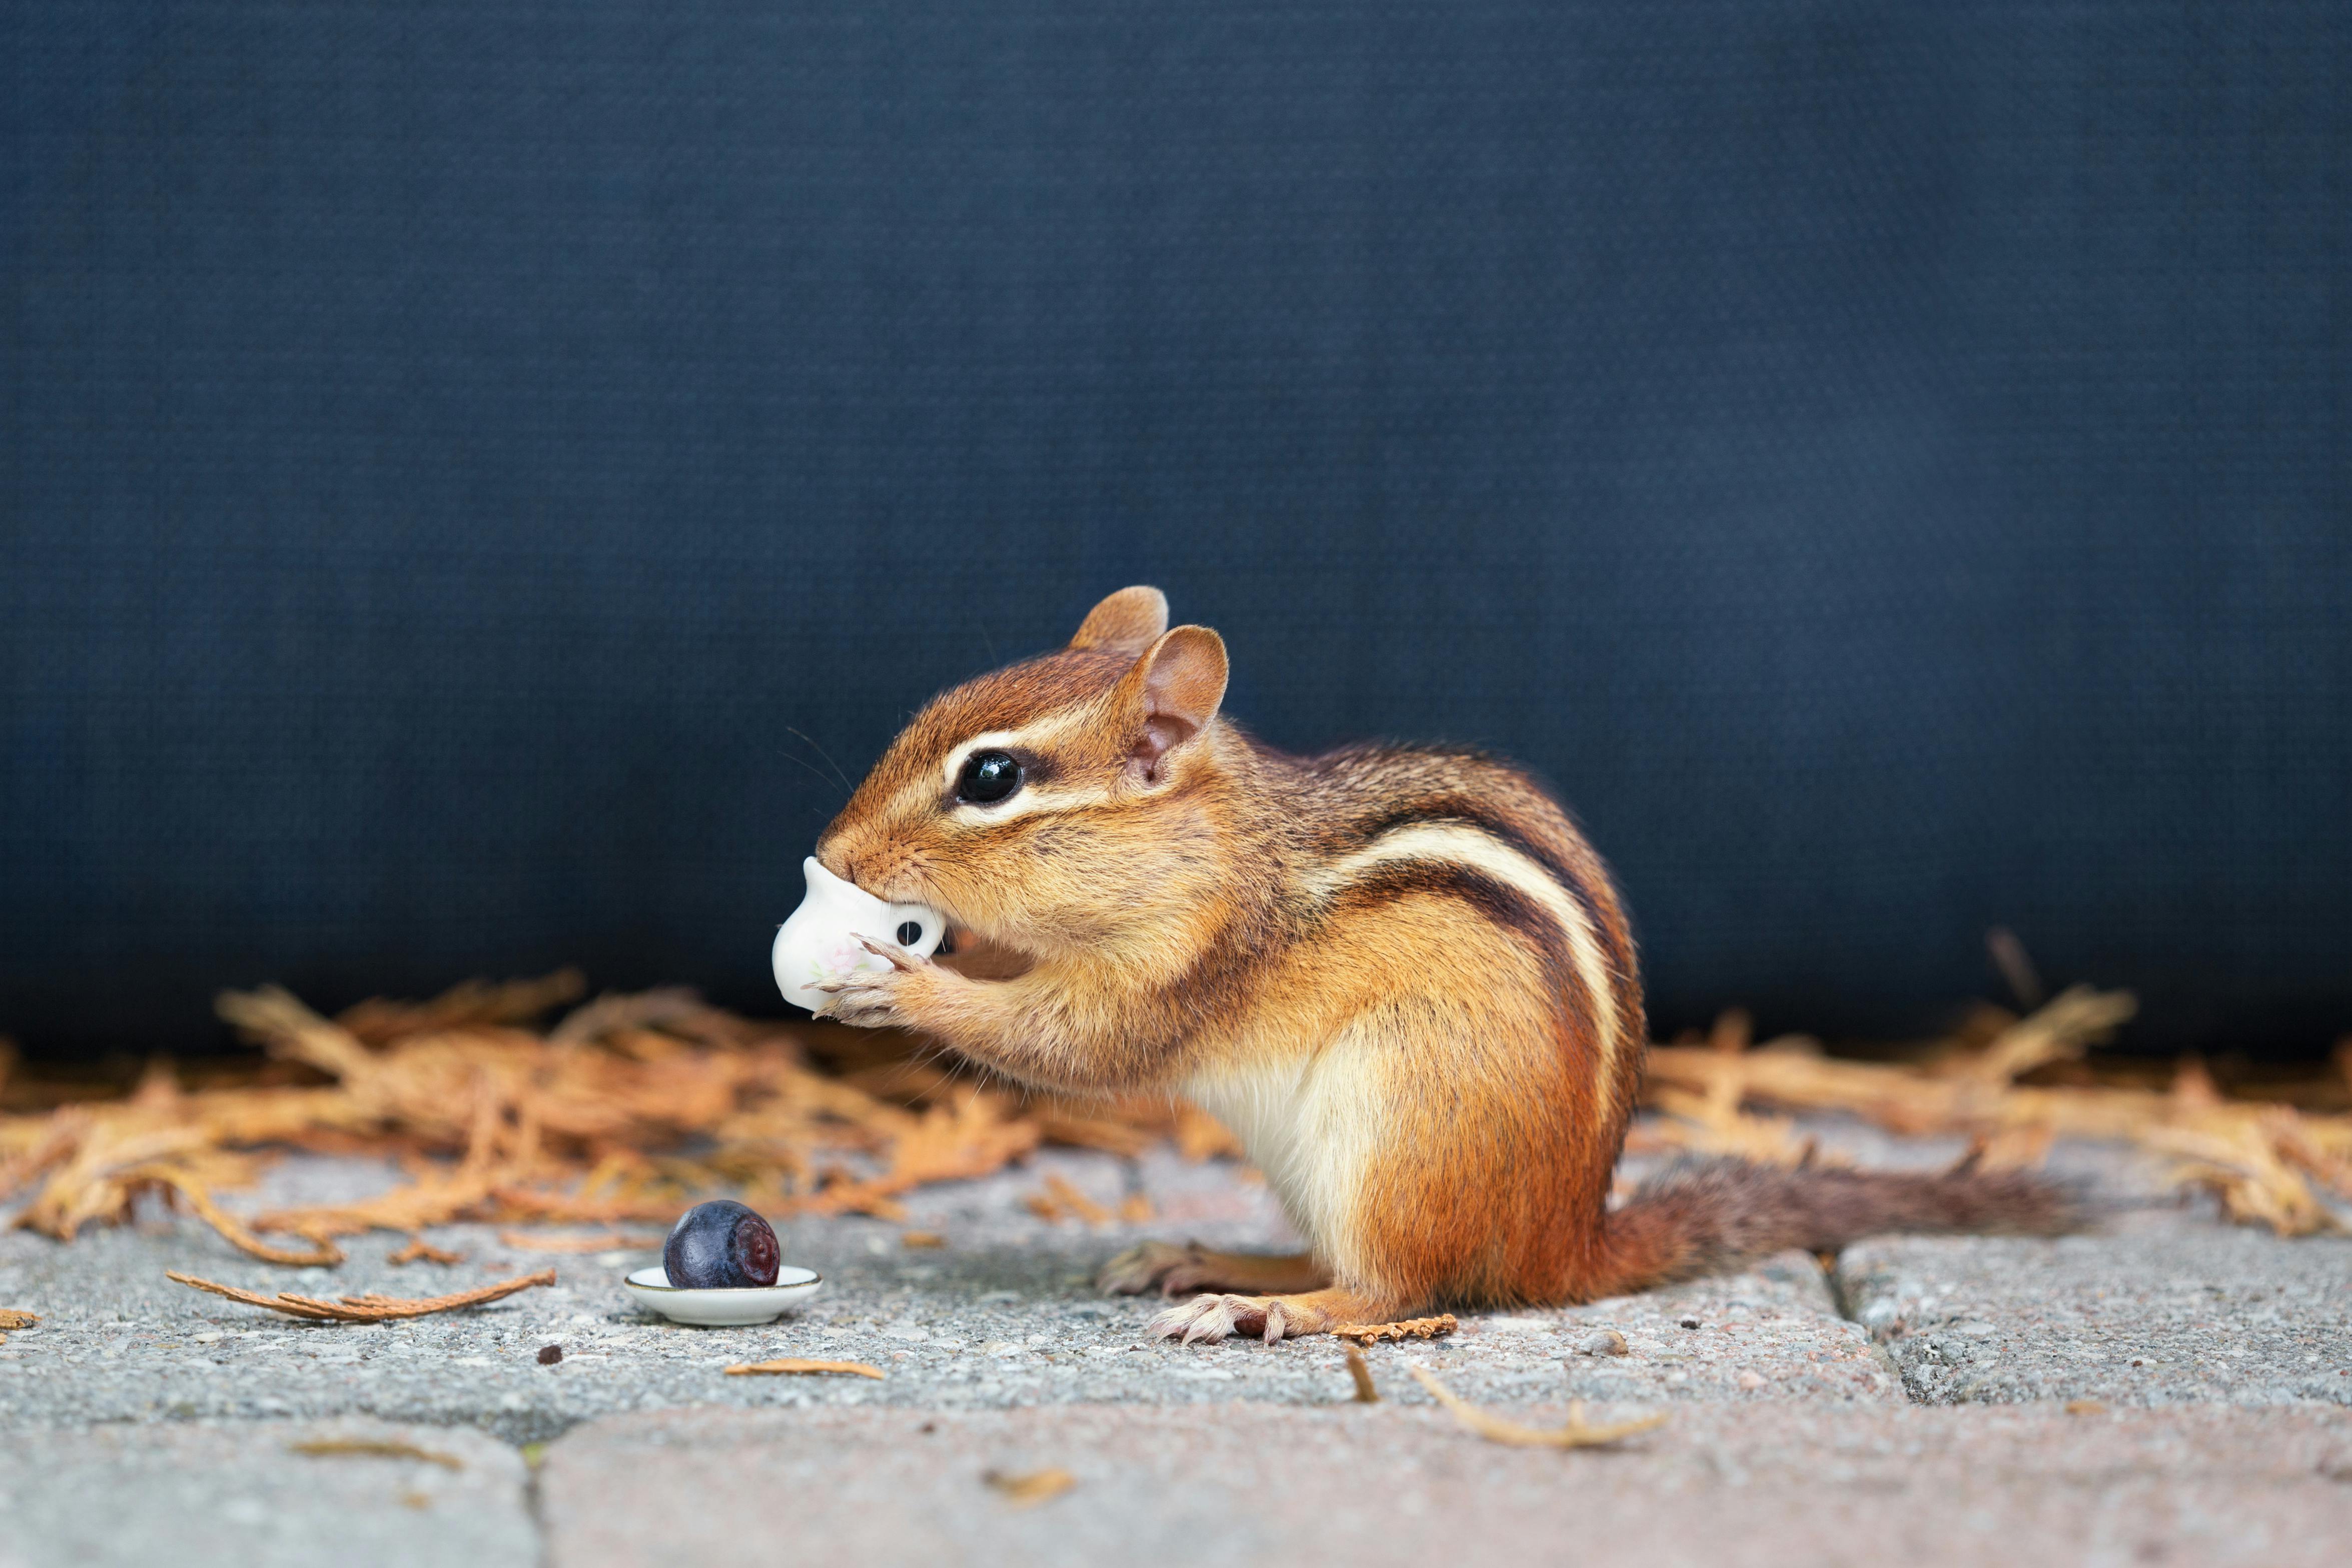 close up photo of chipmunk holding a cup